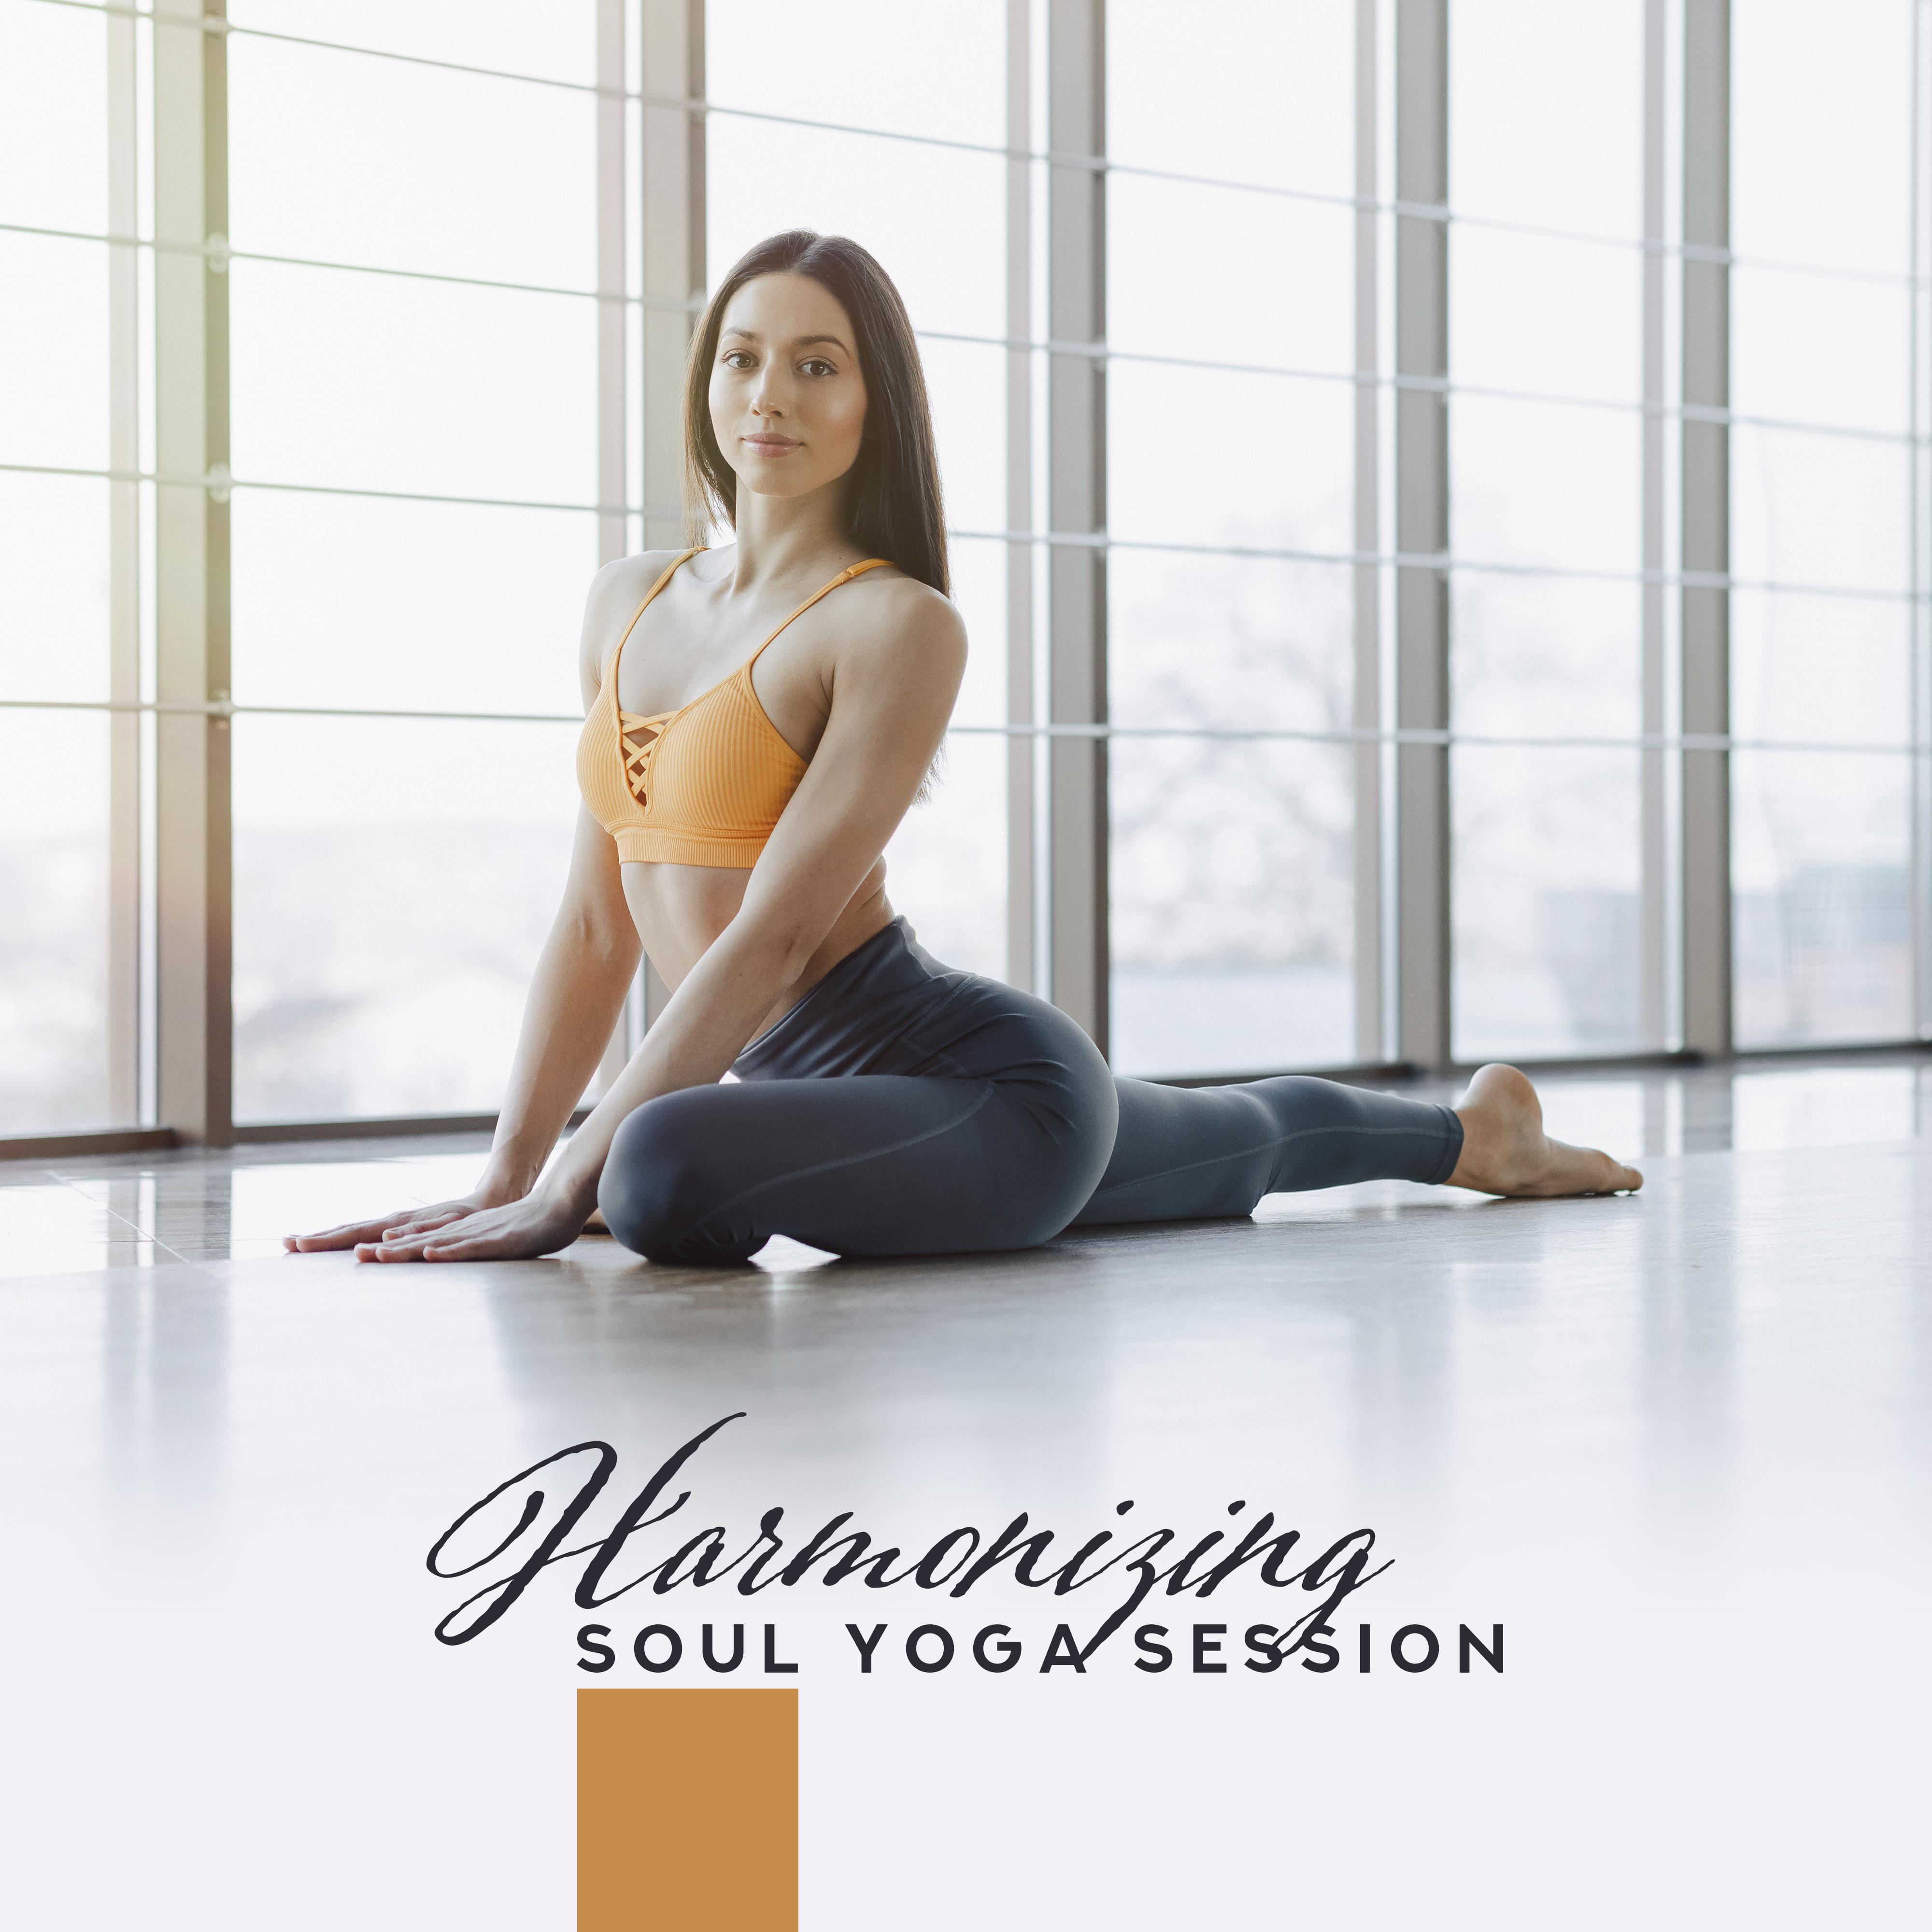 Harmonizing Soul Yoga Session: 2019 New Age Ambient Music for Meditation & Relaxation, Mindfullness Zen, Mantra Songs, Third Eye Open